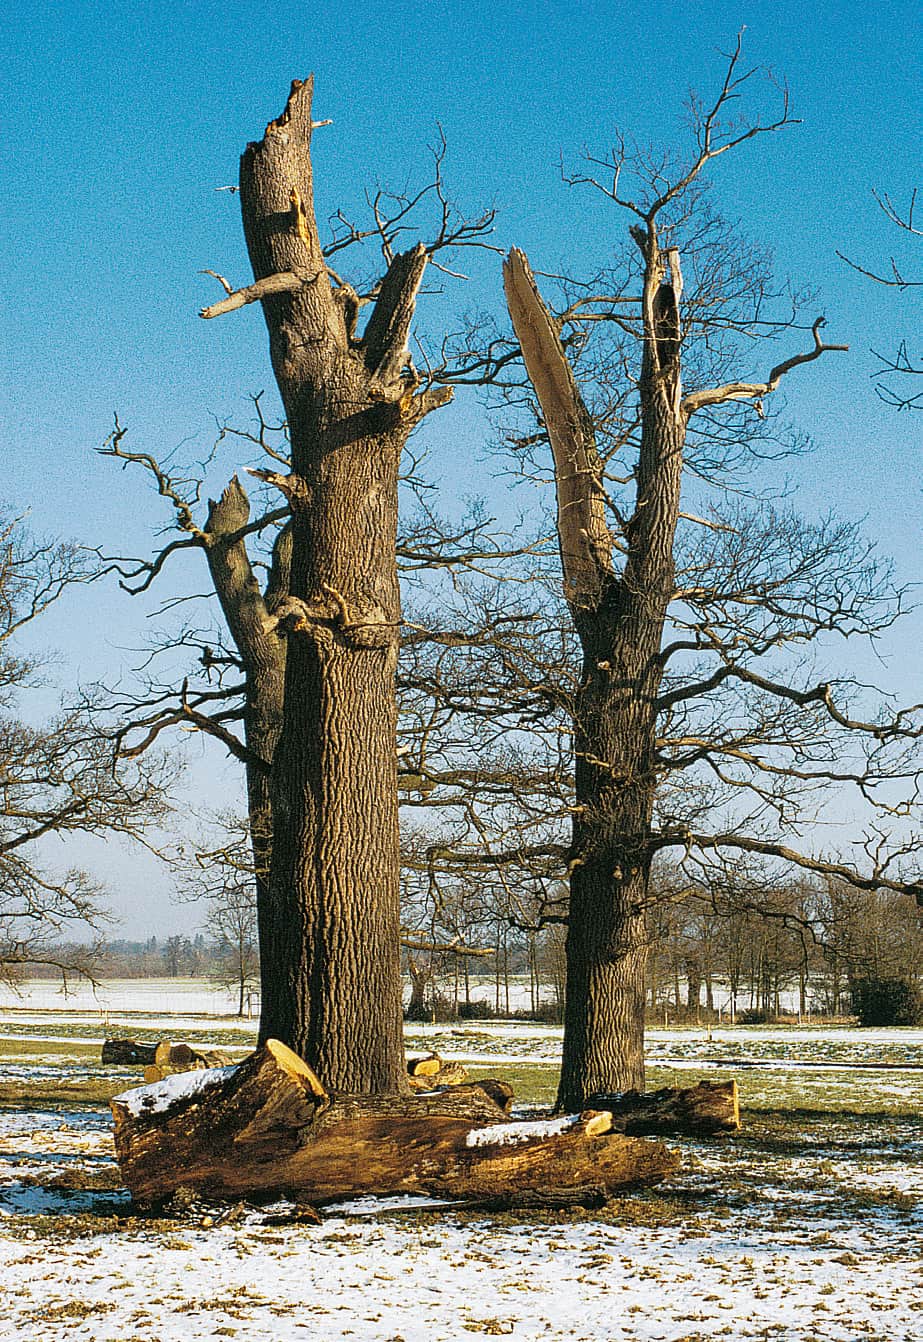 5. Dead standing oaks where Roy Finch did plunge cuts in limbs and Bill Cathcart’s team at Windsor then winched the limbs off to leave monoliths with reasonably natural-looking broken stub ends.